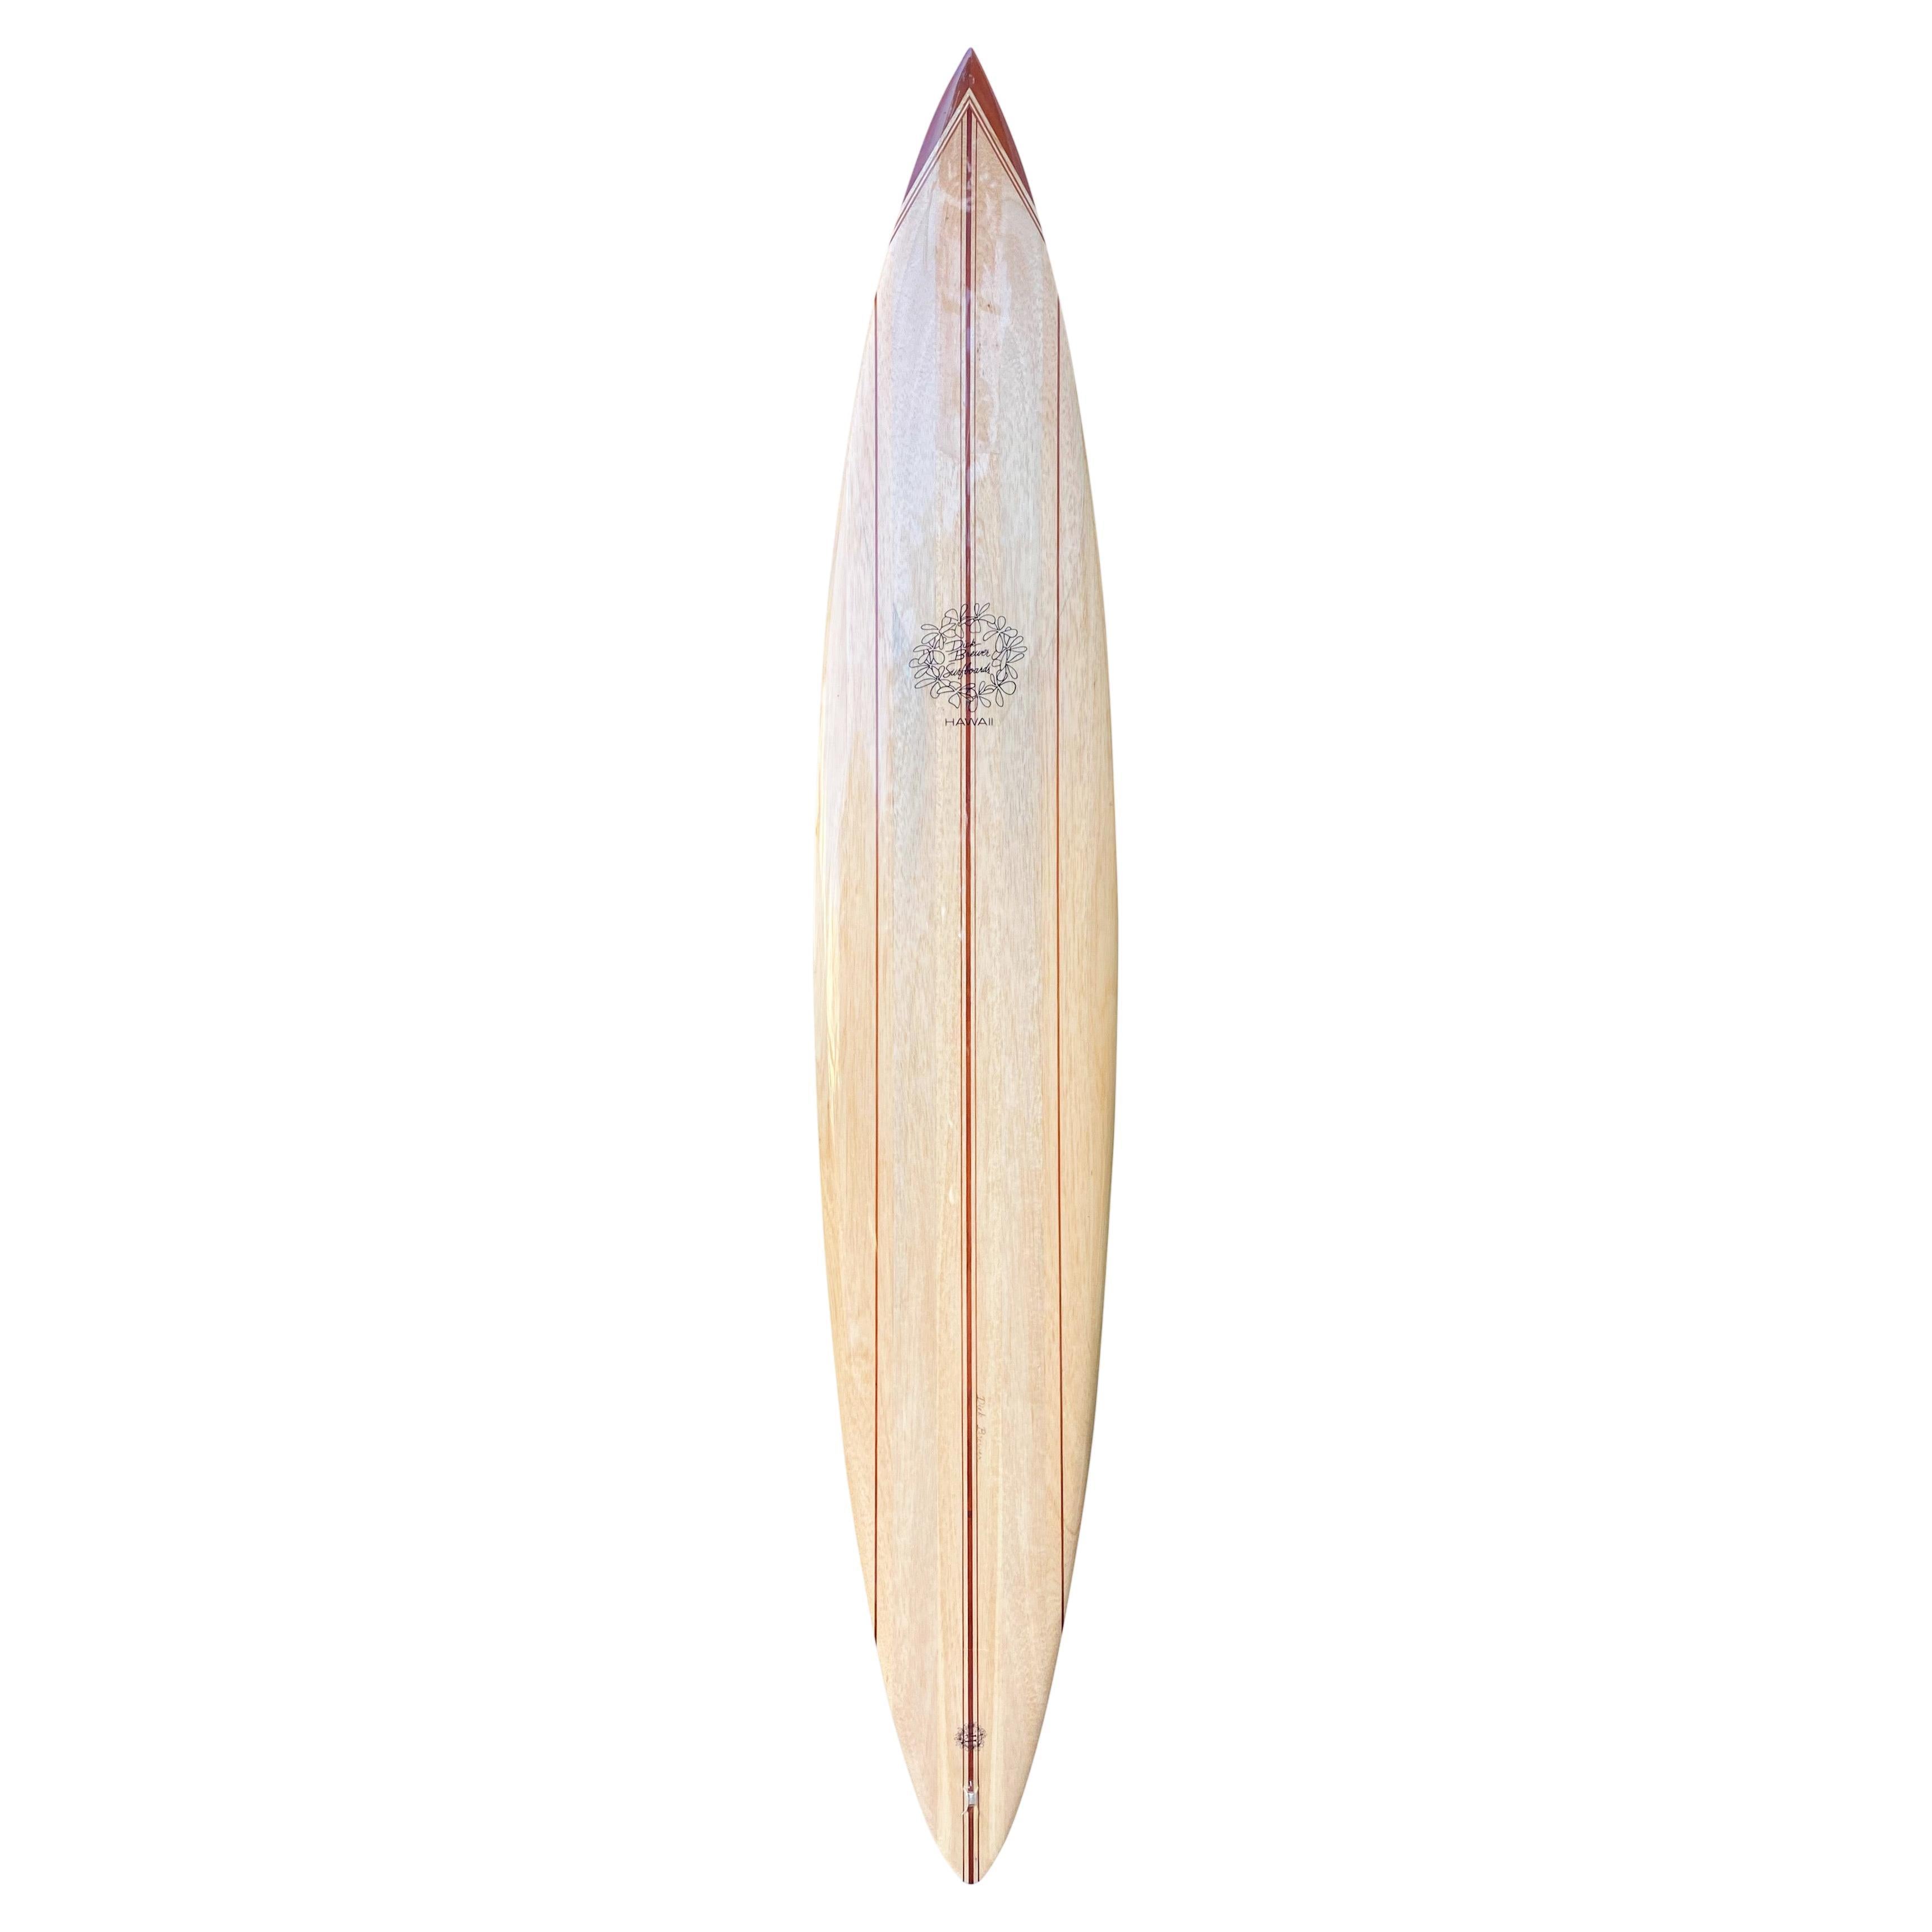 Brewer balsawood surfboard shaped by Dick Brewer